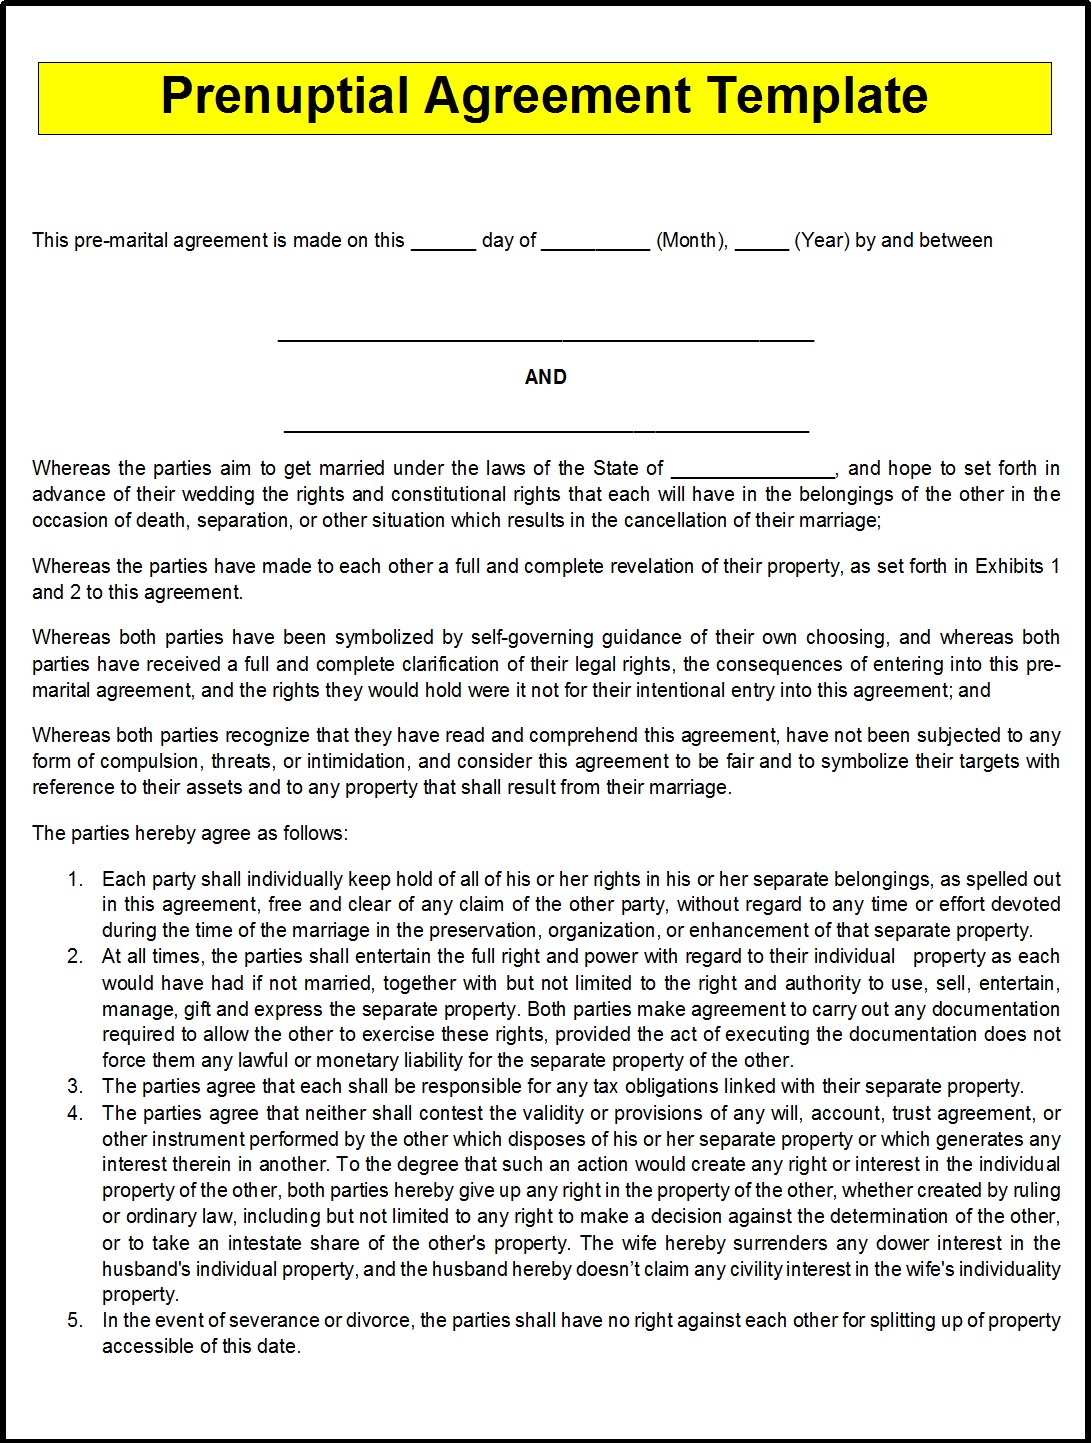 Prenuptial Agreement Template – Excel Word Templates For uk prenuptial agreement template